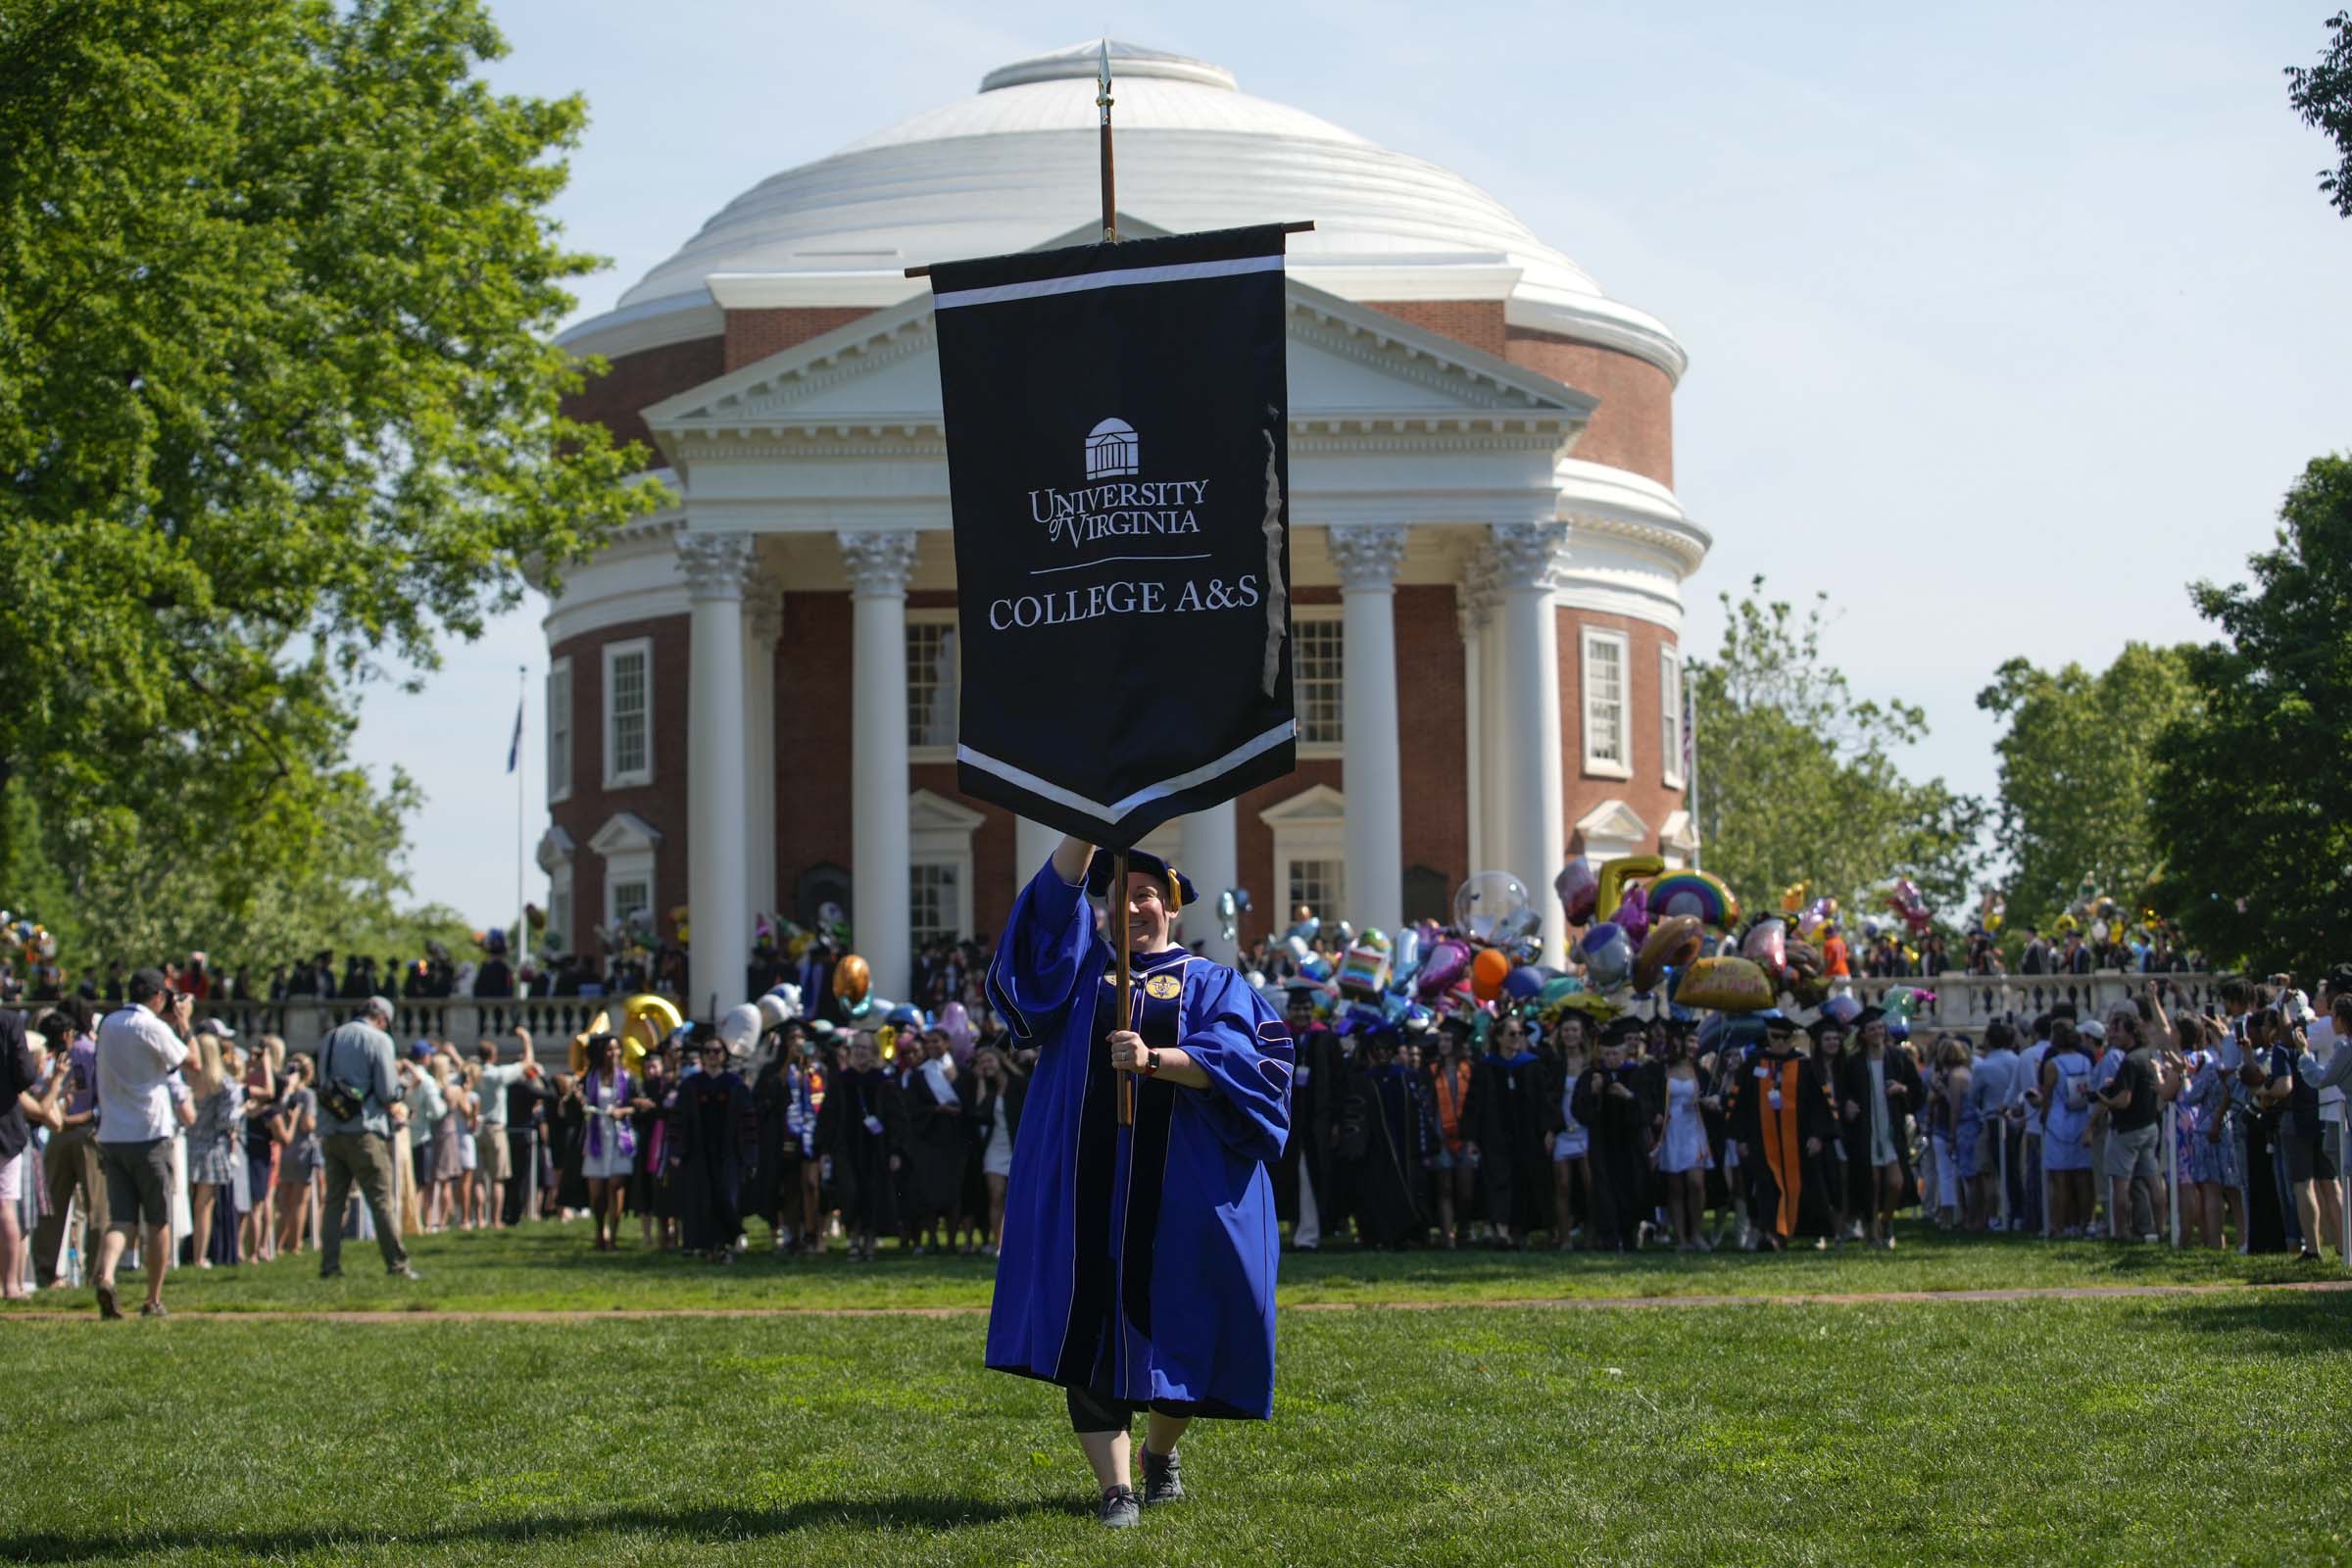 Leading a crowd of graduating students, a woman in a blue robe carries a banner reading University of Virginia College A&S